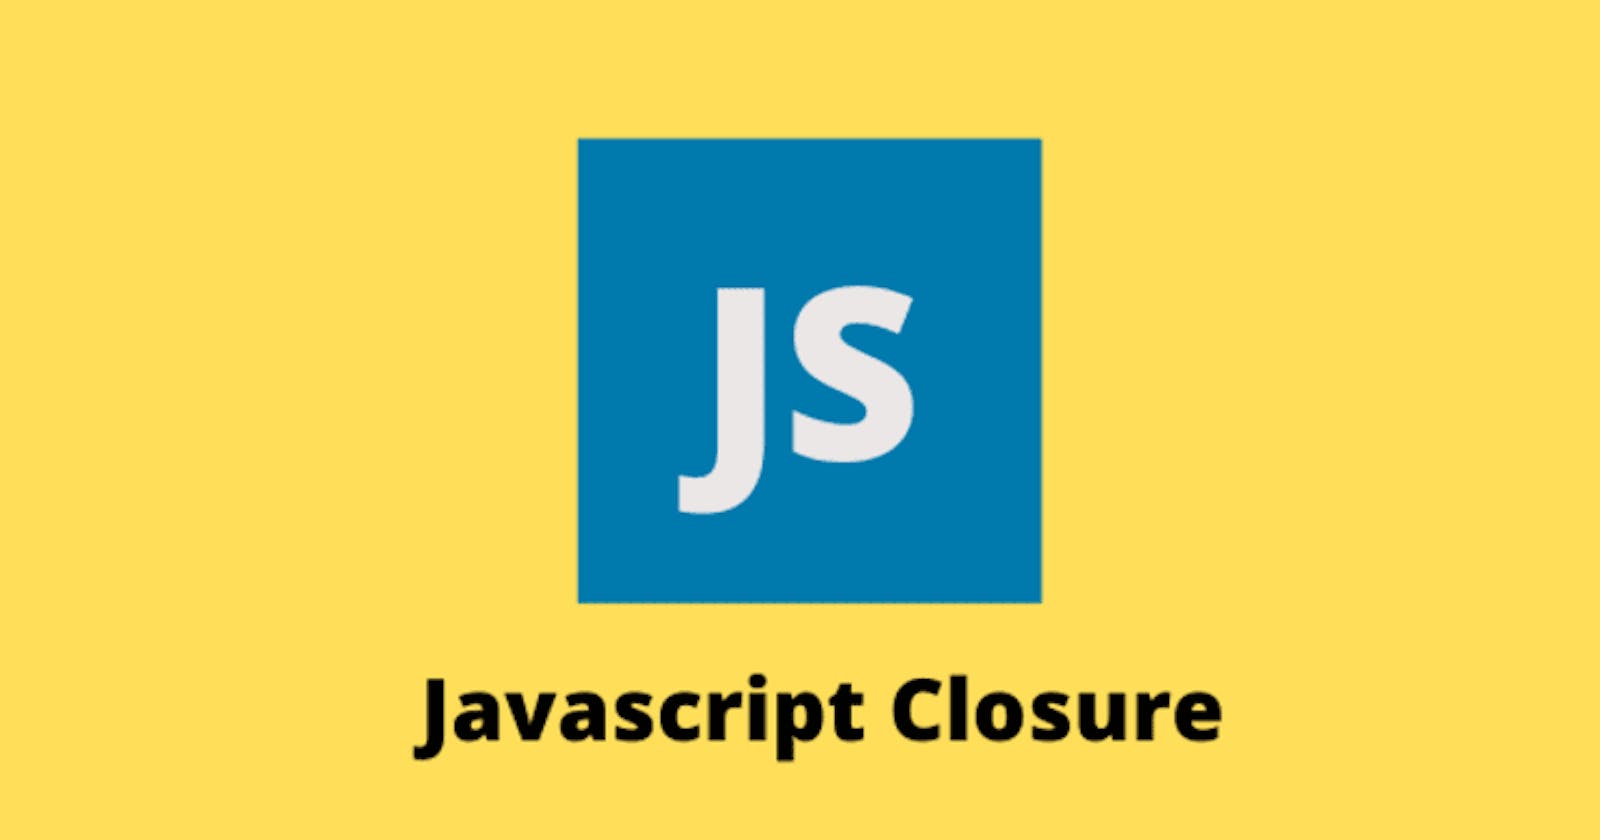 Getting Started With Javascript Closure